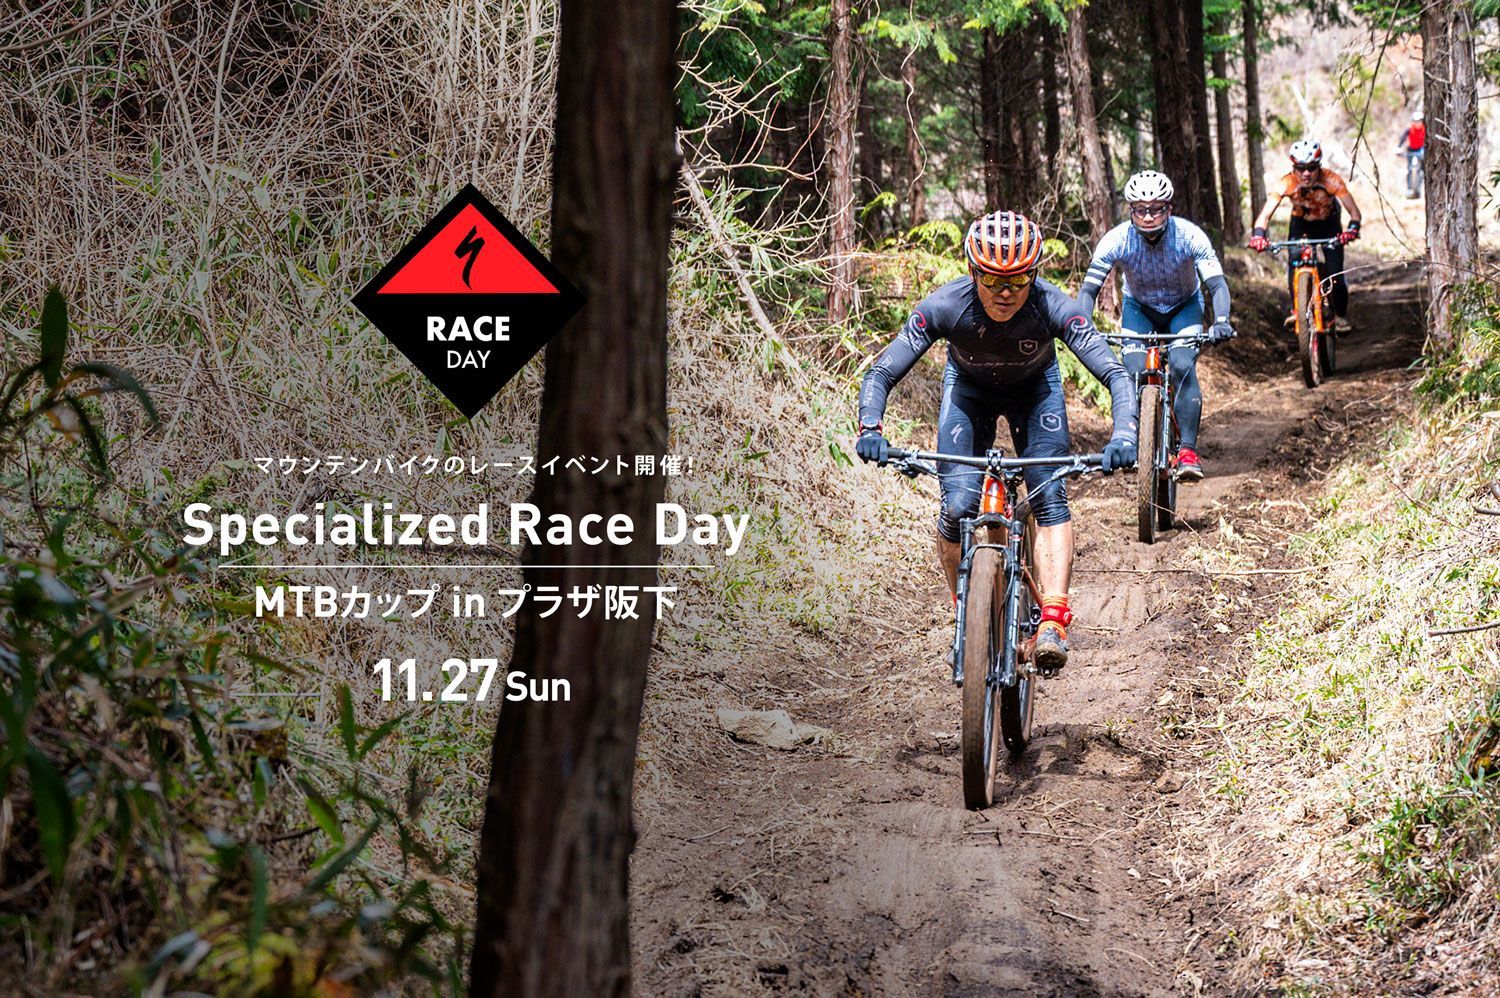 Specialized Race Day MTBカップinプラザ阪下参加者募集！